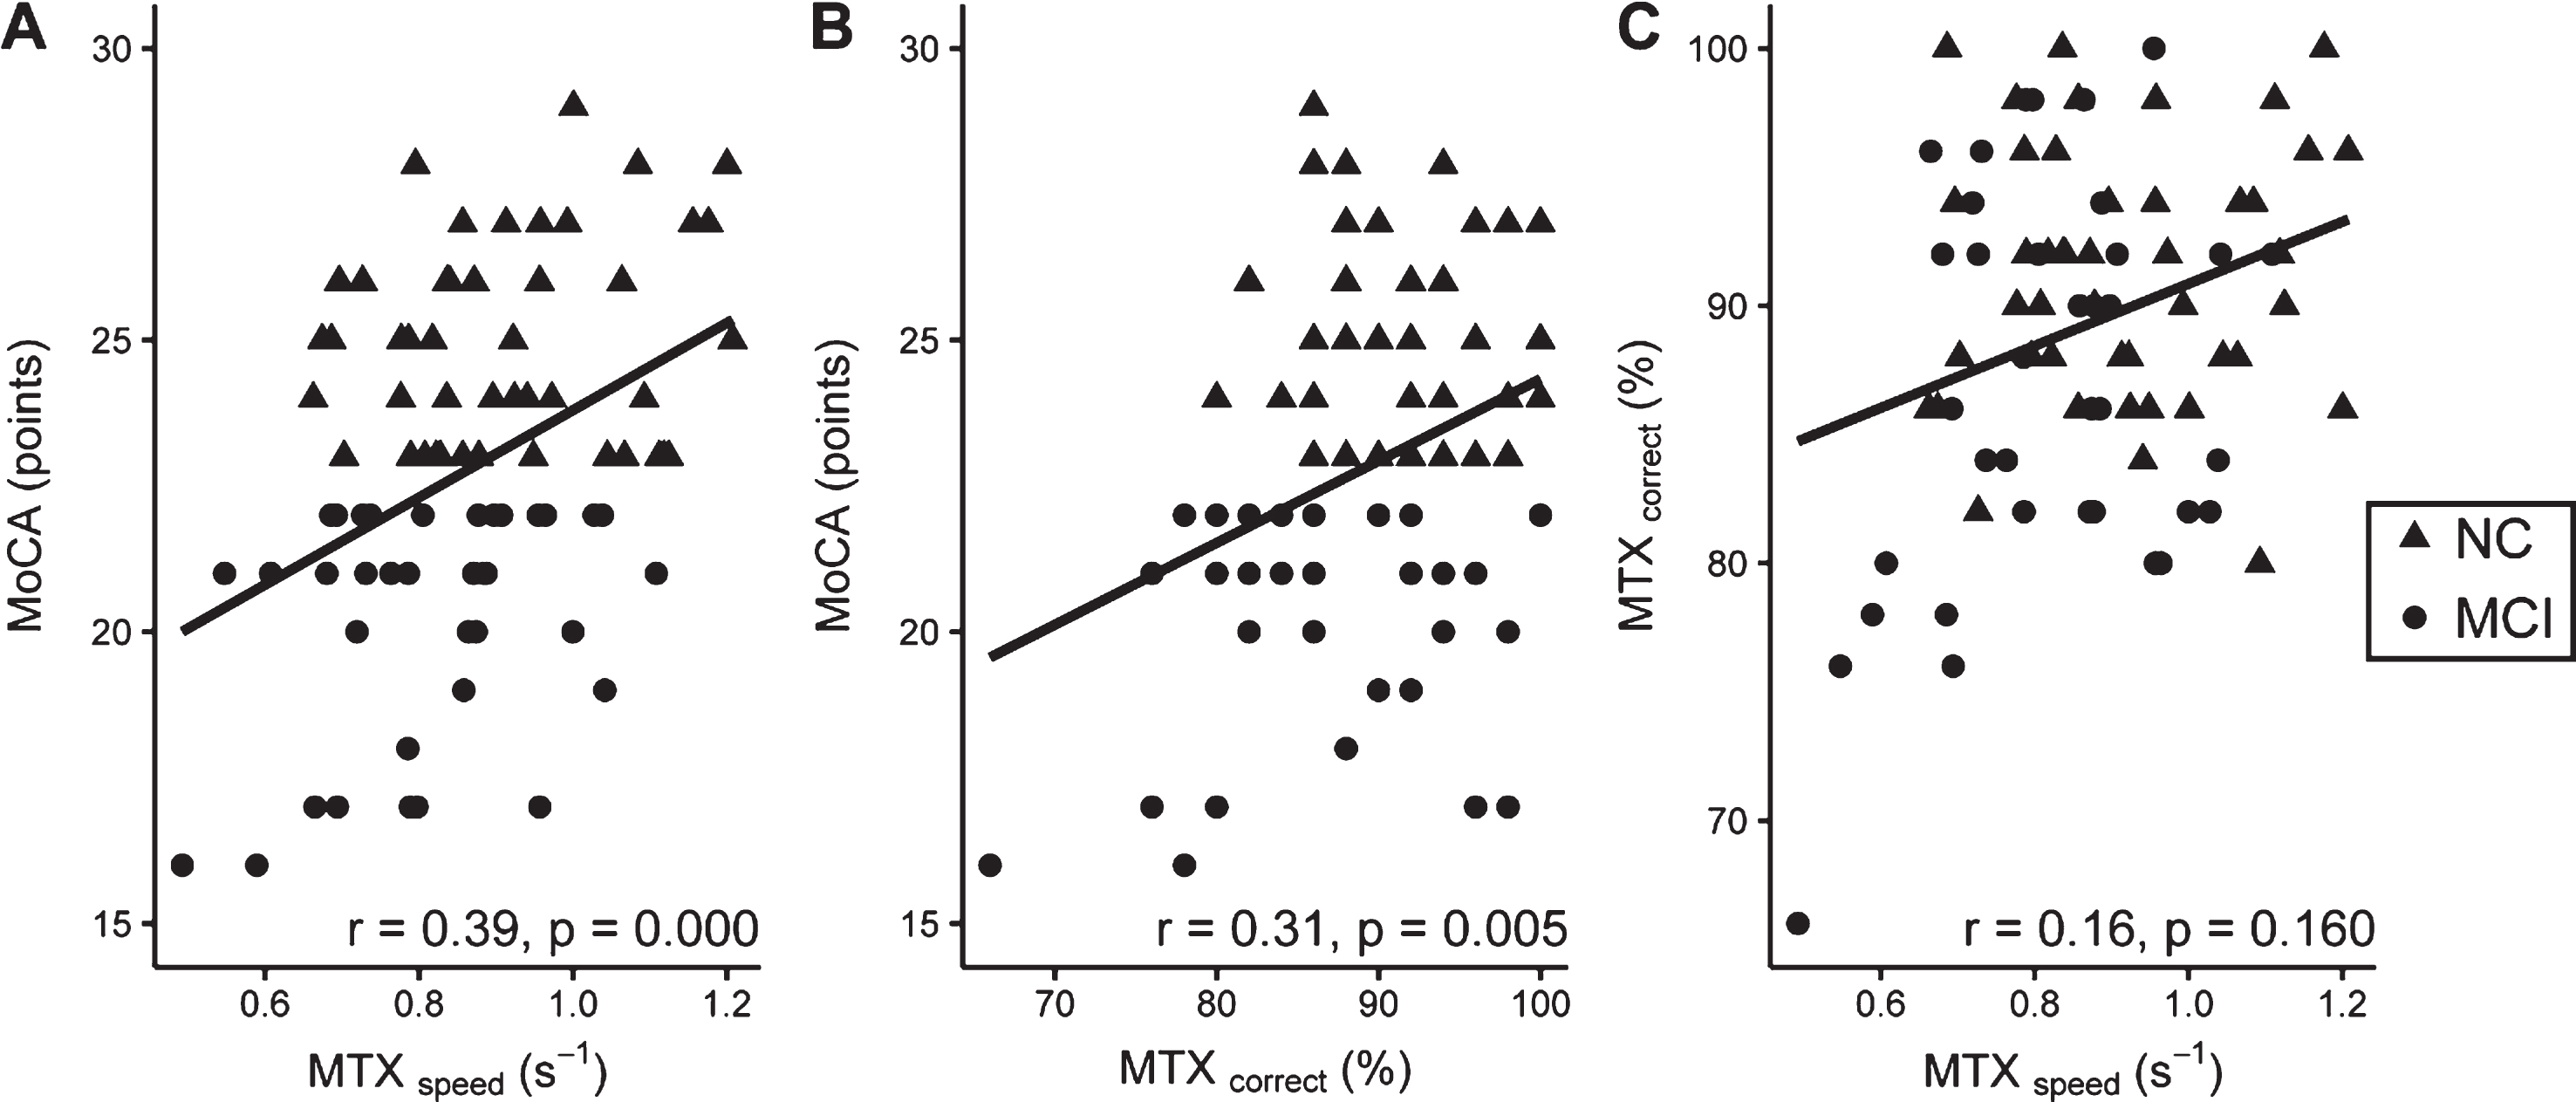 Associations between A) MTXspeed and MoCA; B) MTXcorrect and MoCA; C) MTXcorrect and MTXspeed. NC and MCI subjects are indicated with dots and triangles respectively. In the right bottom corner of each graph the rho and corresponding p value are shown of the correlation between the two variables.